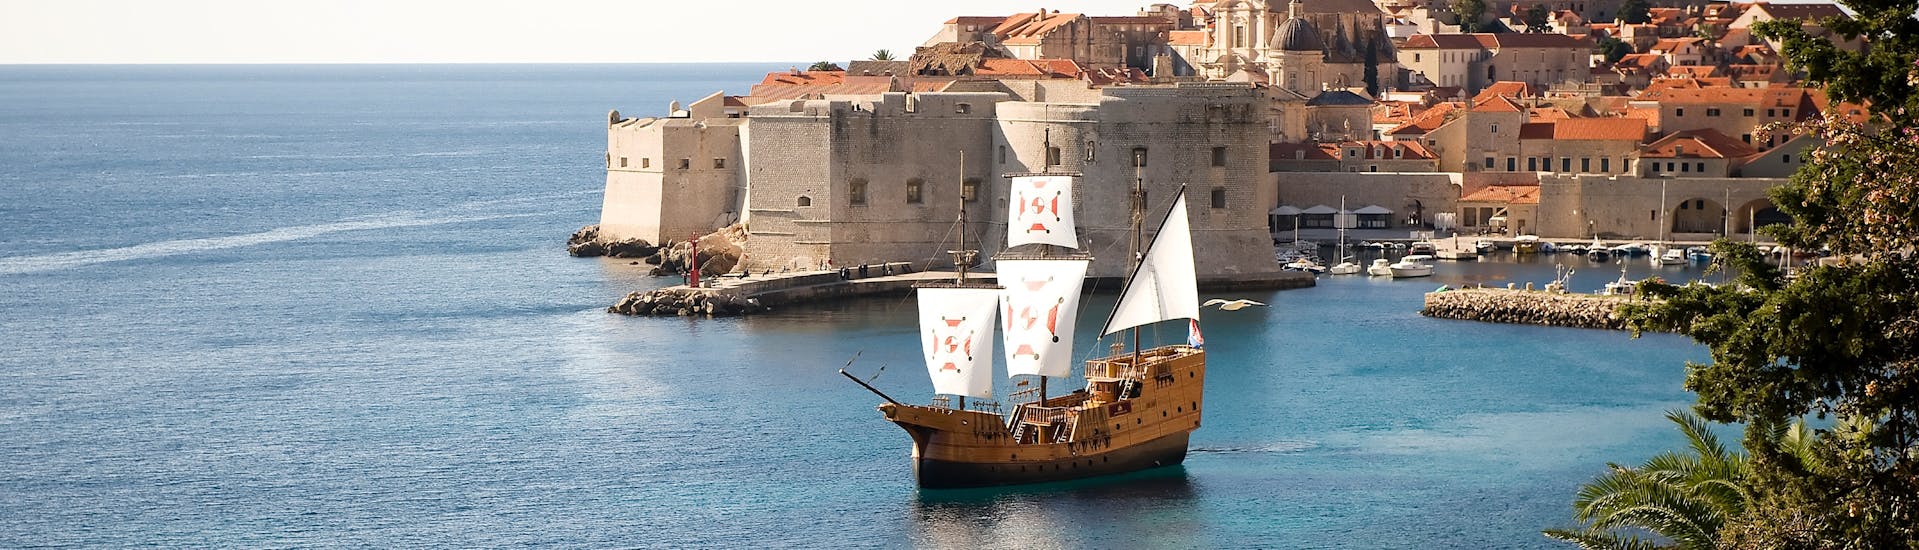 Picture of the traditional Karaka ship, used for the boat trip to the old town of Dubrovnik with walking tour from Karaka Dubrovnik.